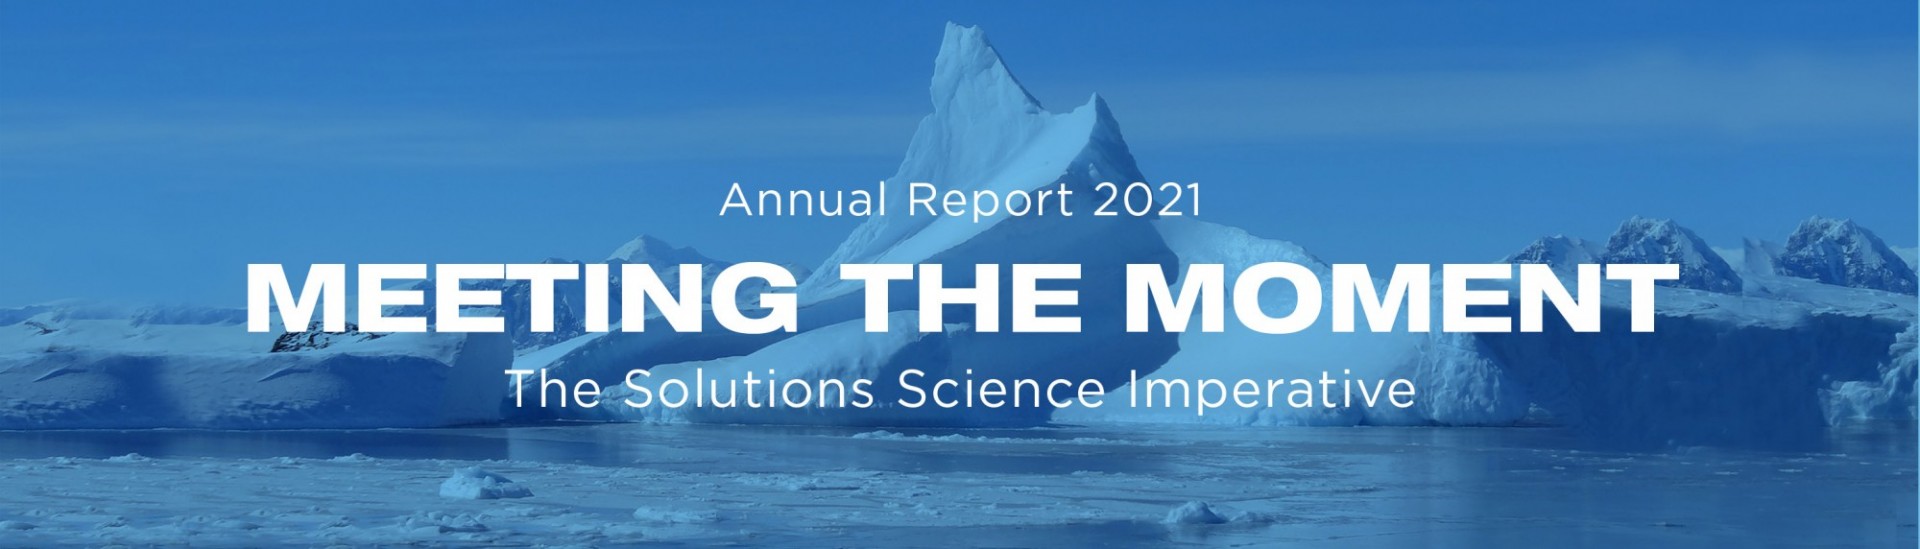 Annual Report 2021 - Meeting the Moment: The Solutions Science Imperative